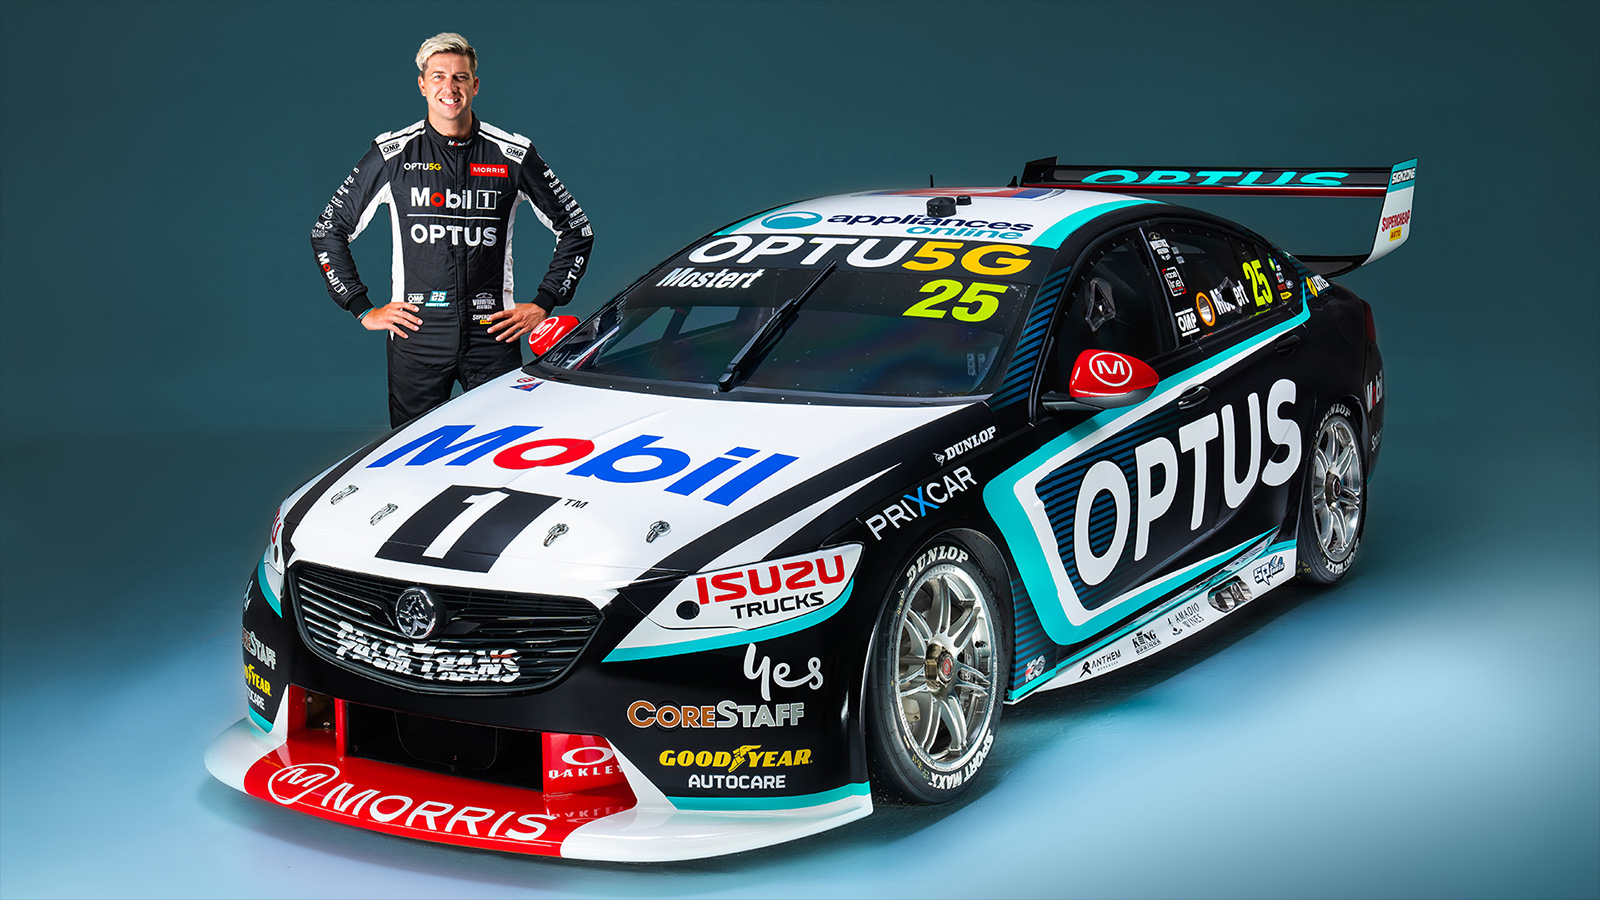 Chaz enters 2022 in the Mobil 1 Optus Racing No. 25.